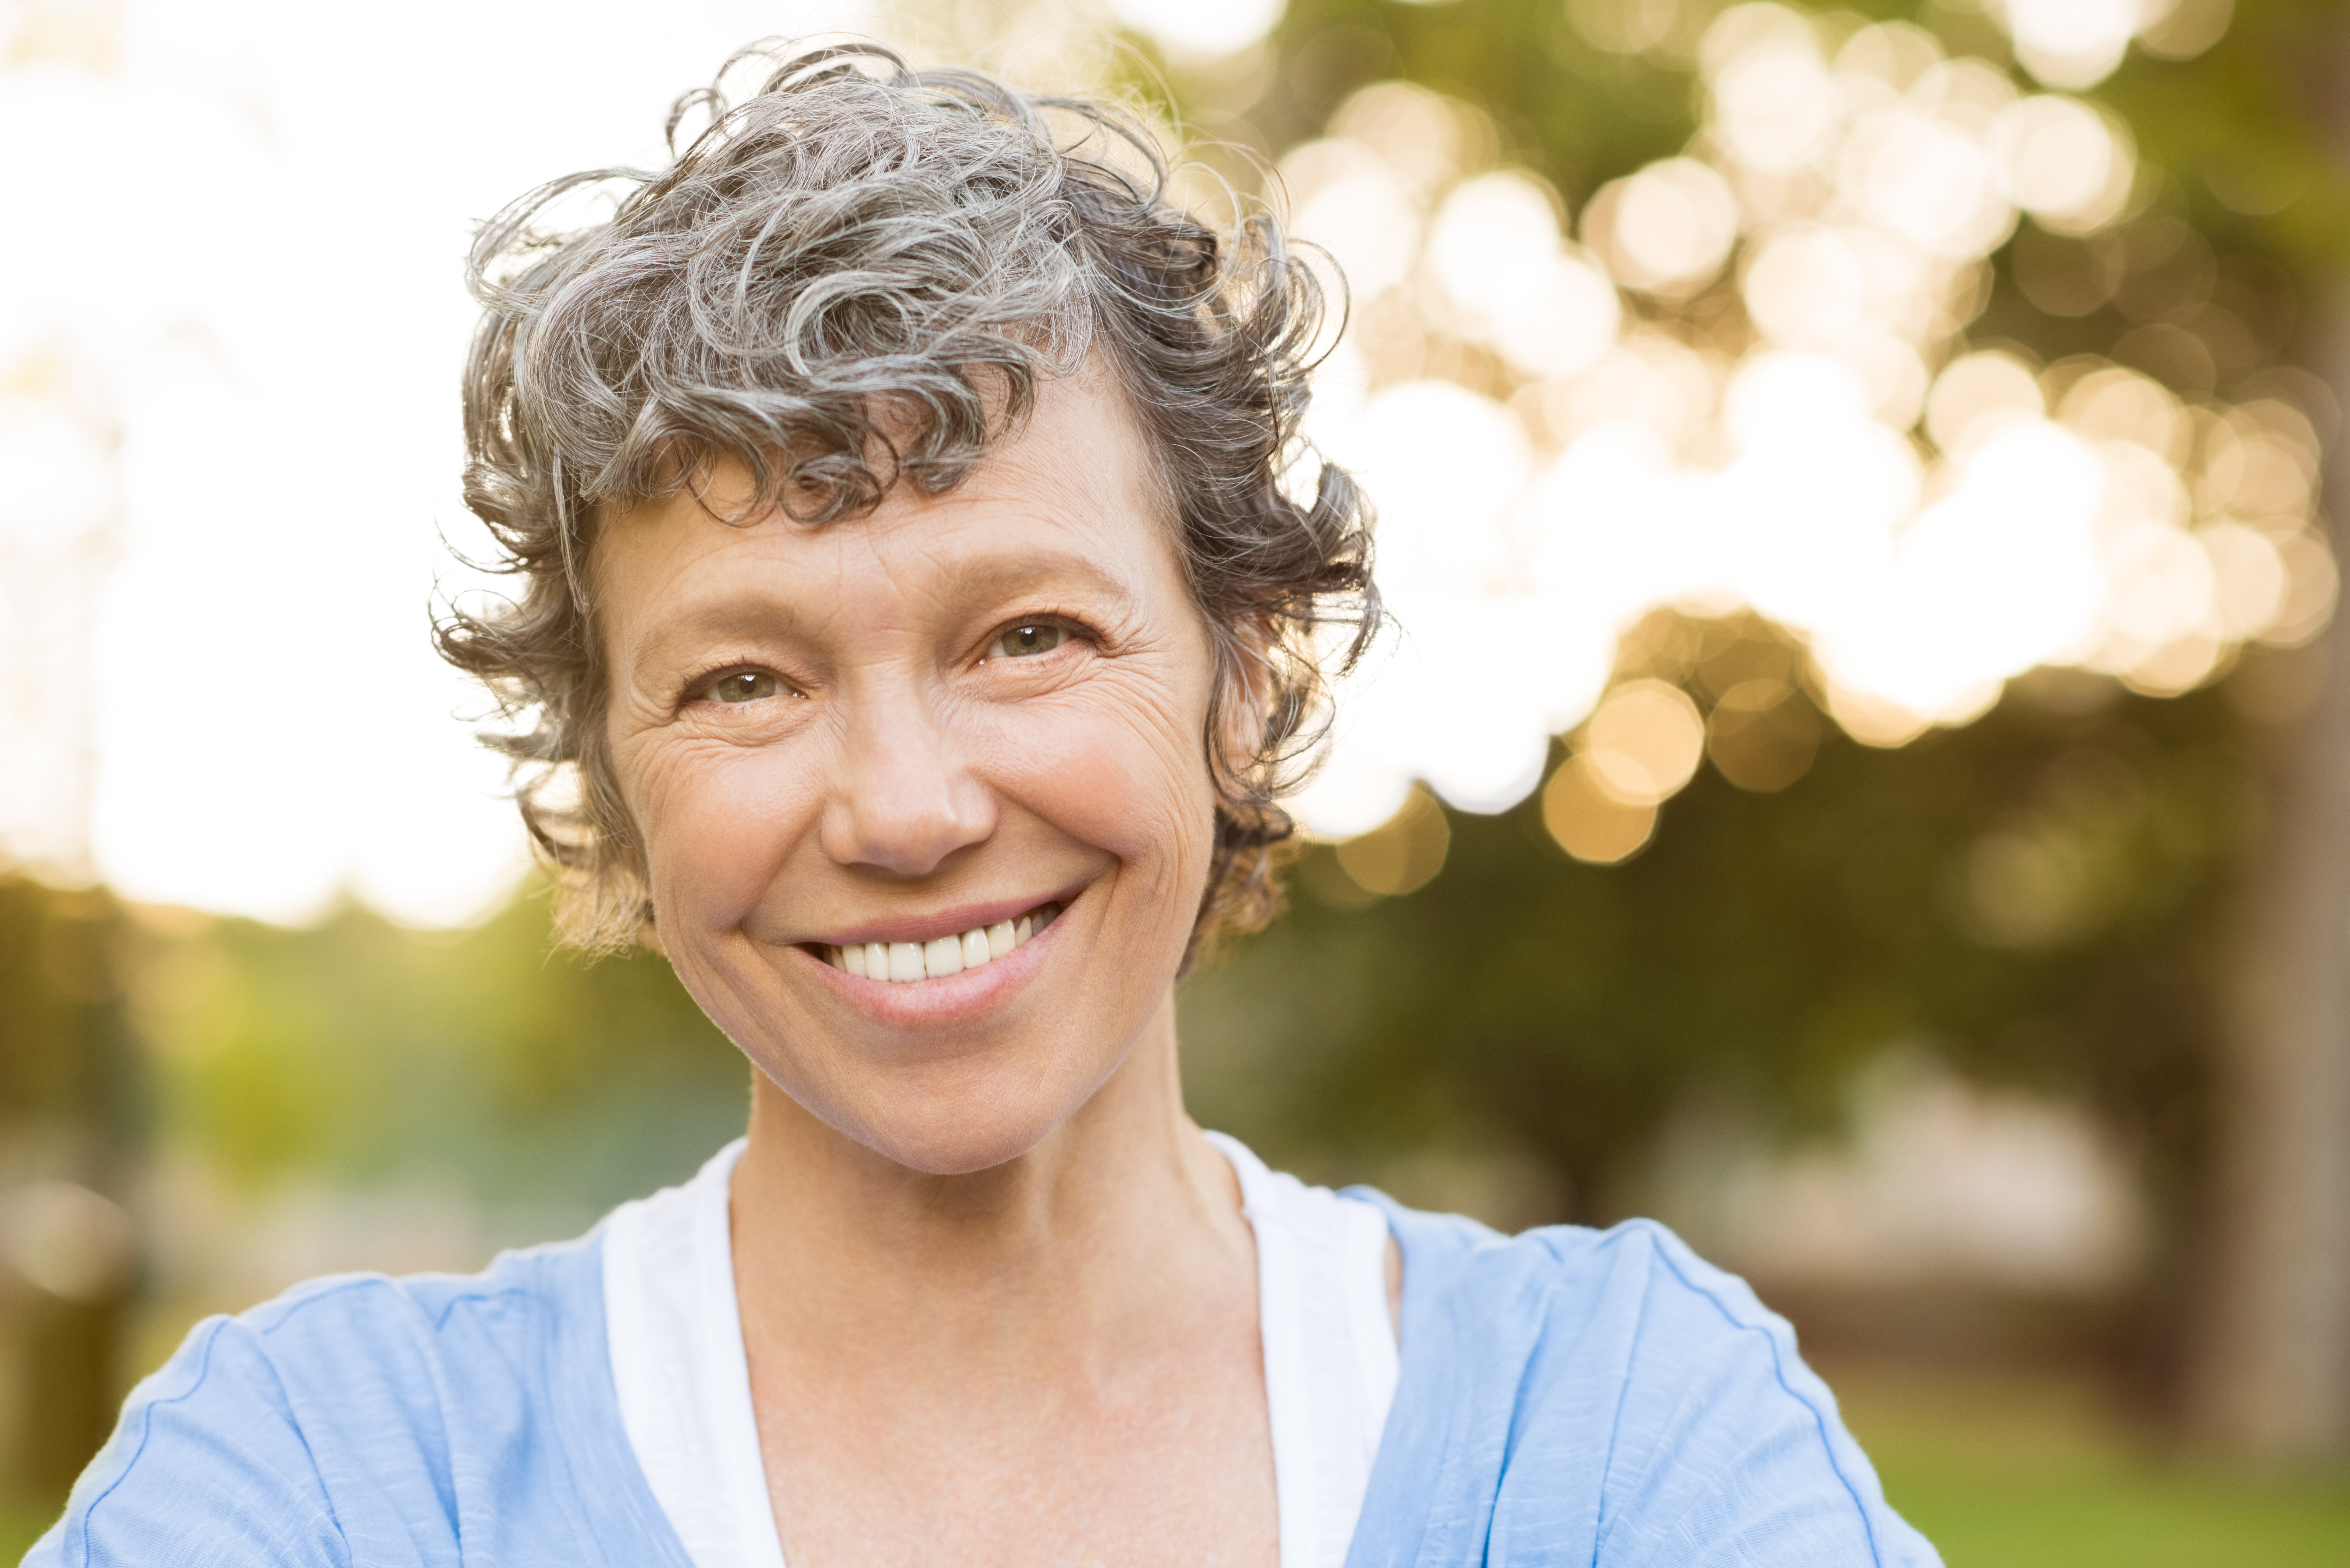 Portrait of senior woman relaxing at park. Close up face of happy senior woman looking at camera. Portrait of a smiling mature woman with grey hair.